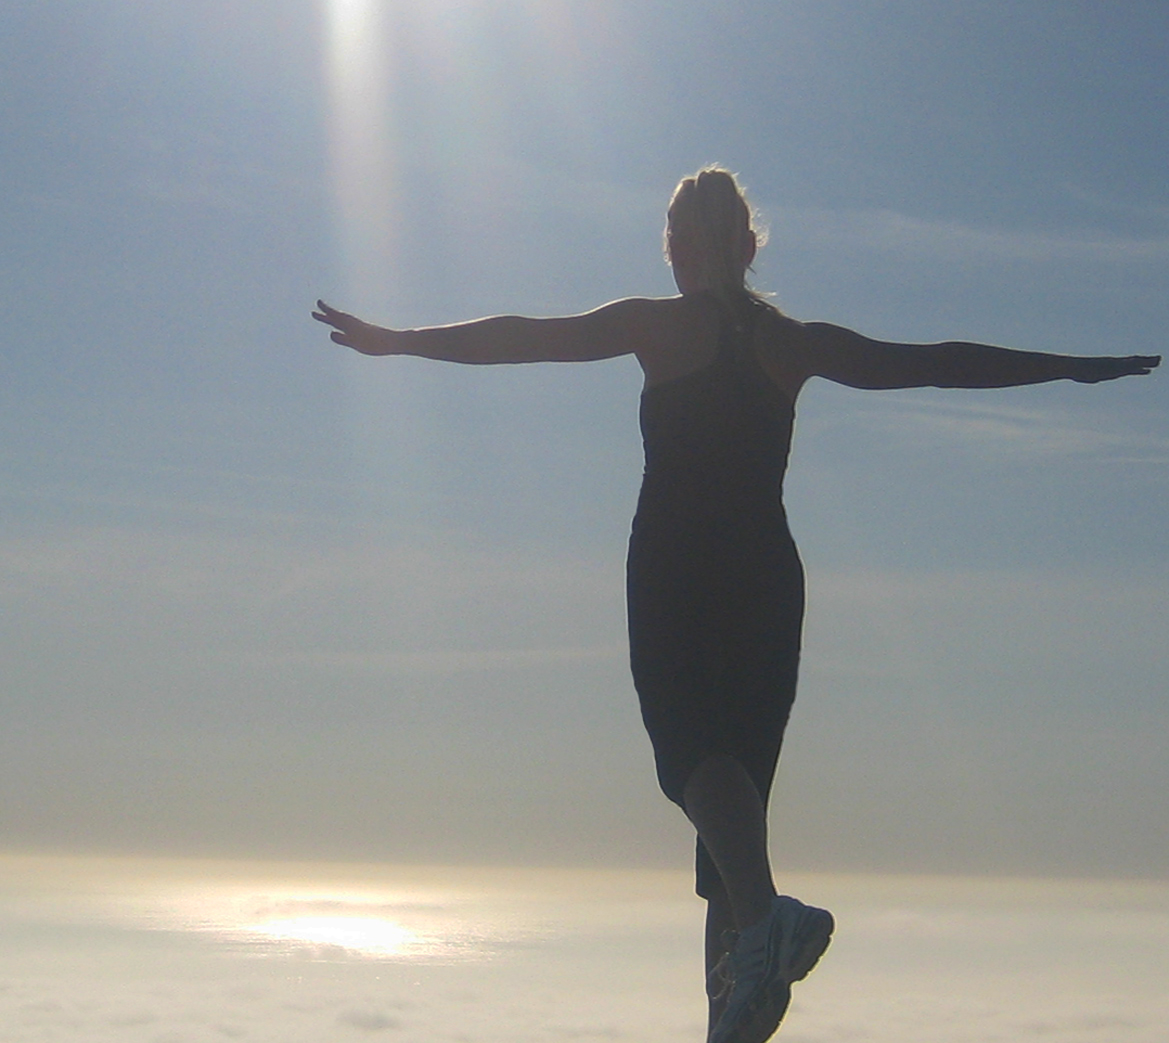 Alex Big Jumps -  above the clouds, Palos Verdes overlooking cloud-covered ocean,  image by lb for linenandlavender.net - http://www.linenandlavender.net/2013/10/courage-and-fear.html